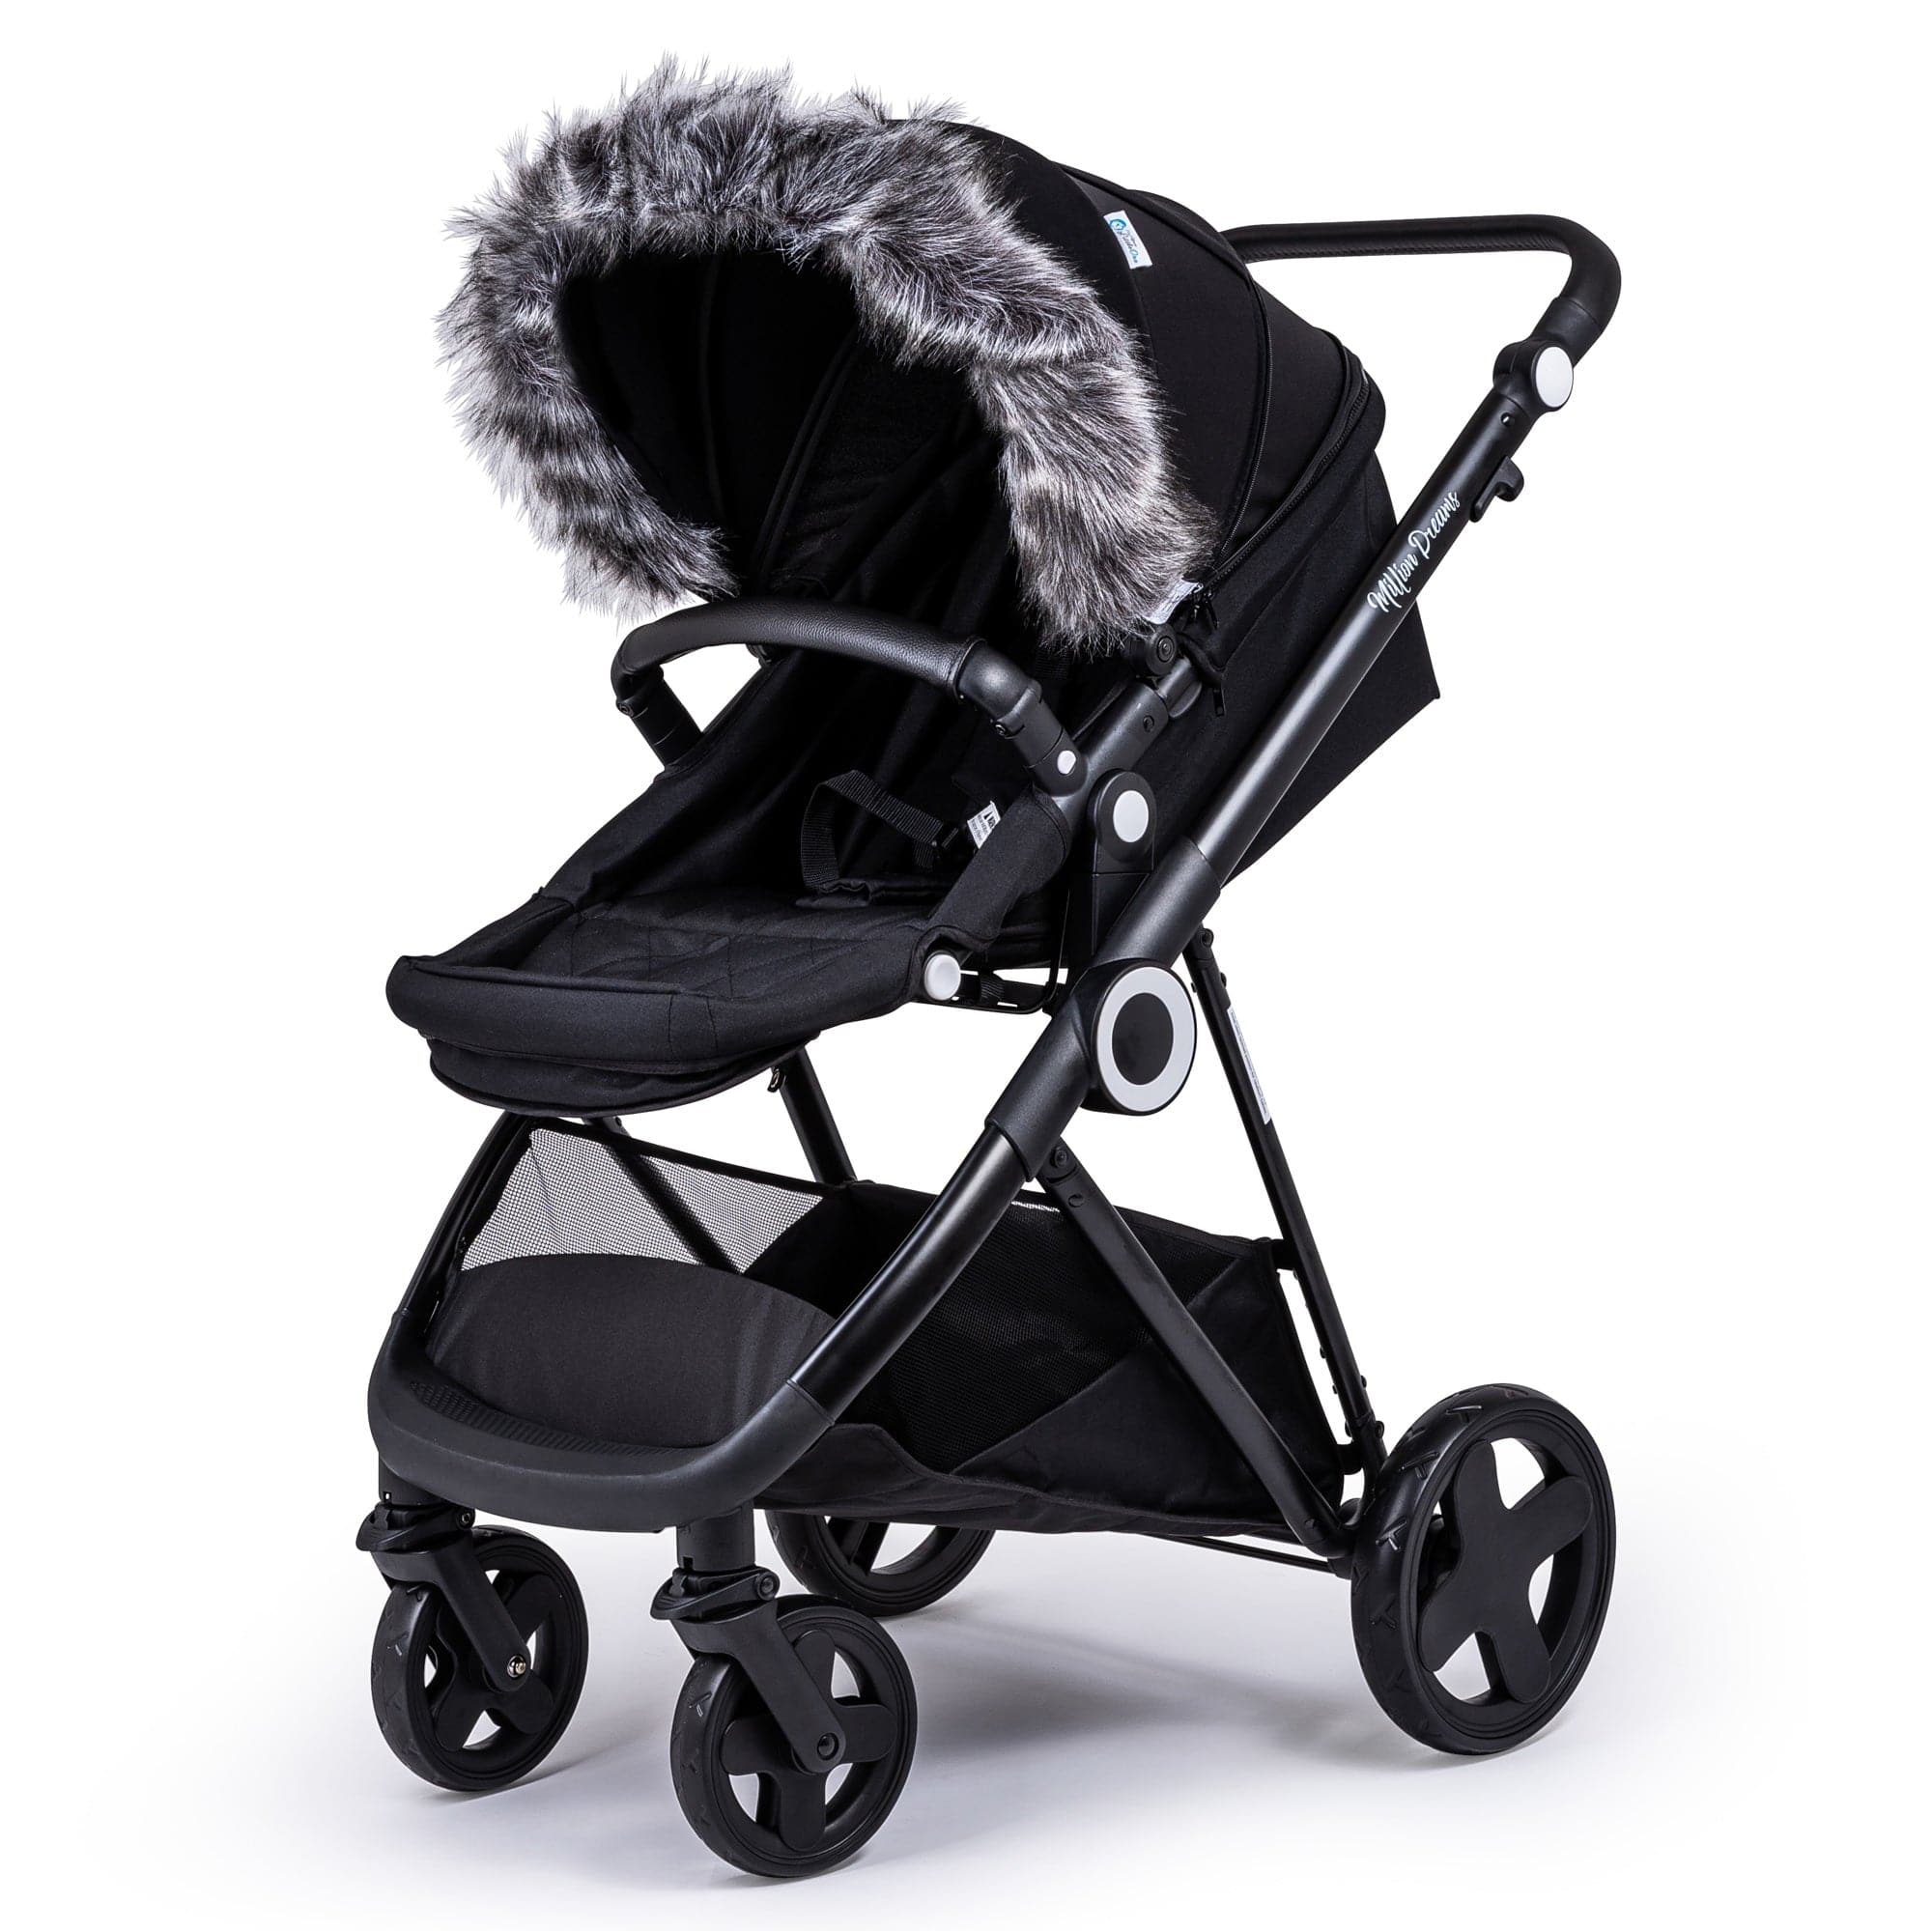 Pram Fur Hood Trim Attachment For Pushchair Compatible with Infababy - Dark Grey / Fits All Models | For Your Little One